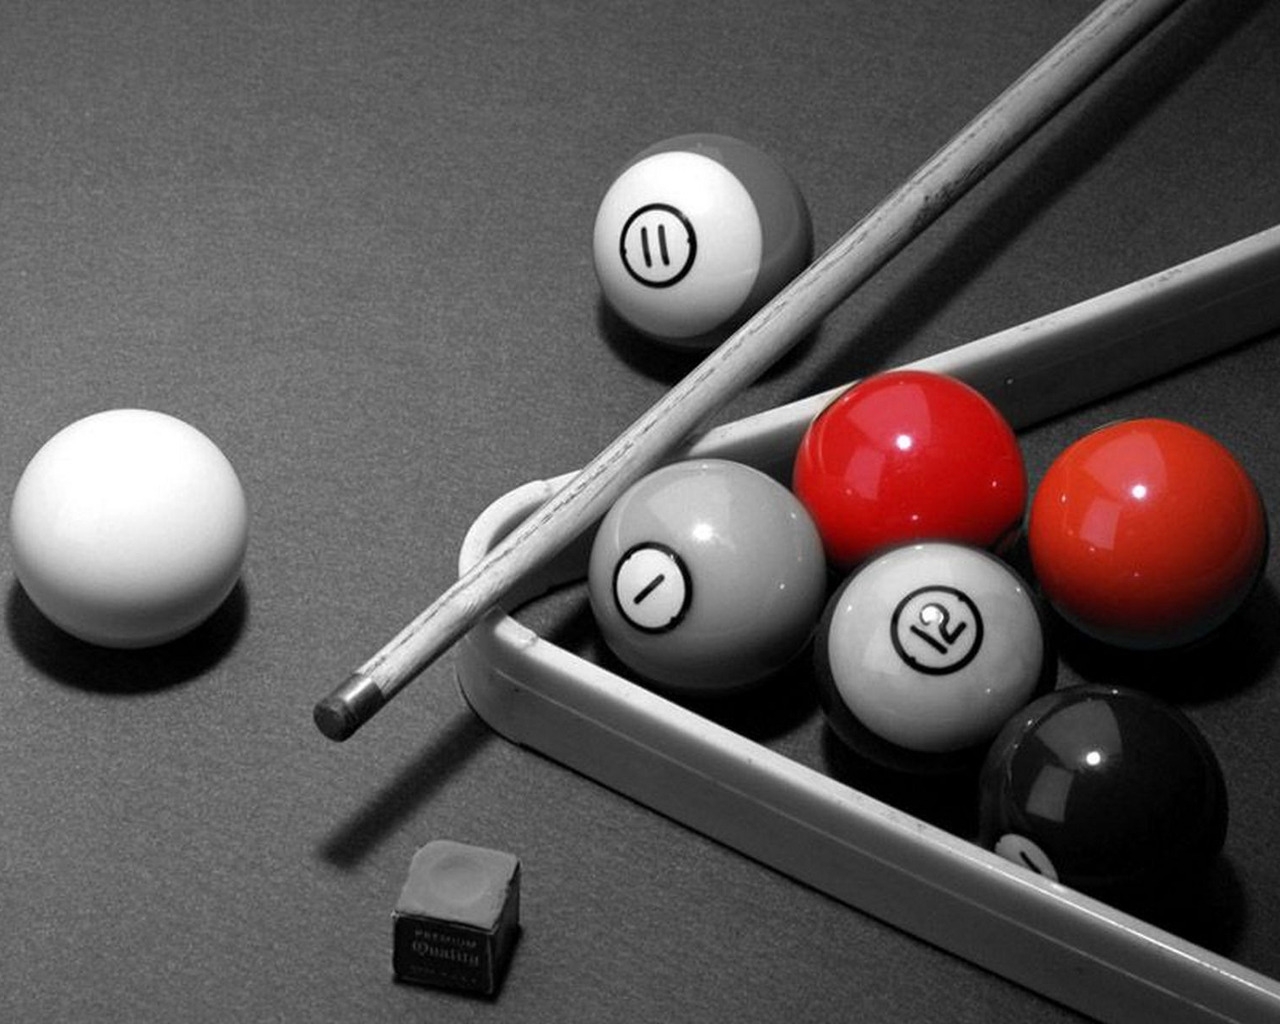 Black & White Pool Table for 1280 x 1024 resolution